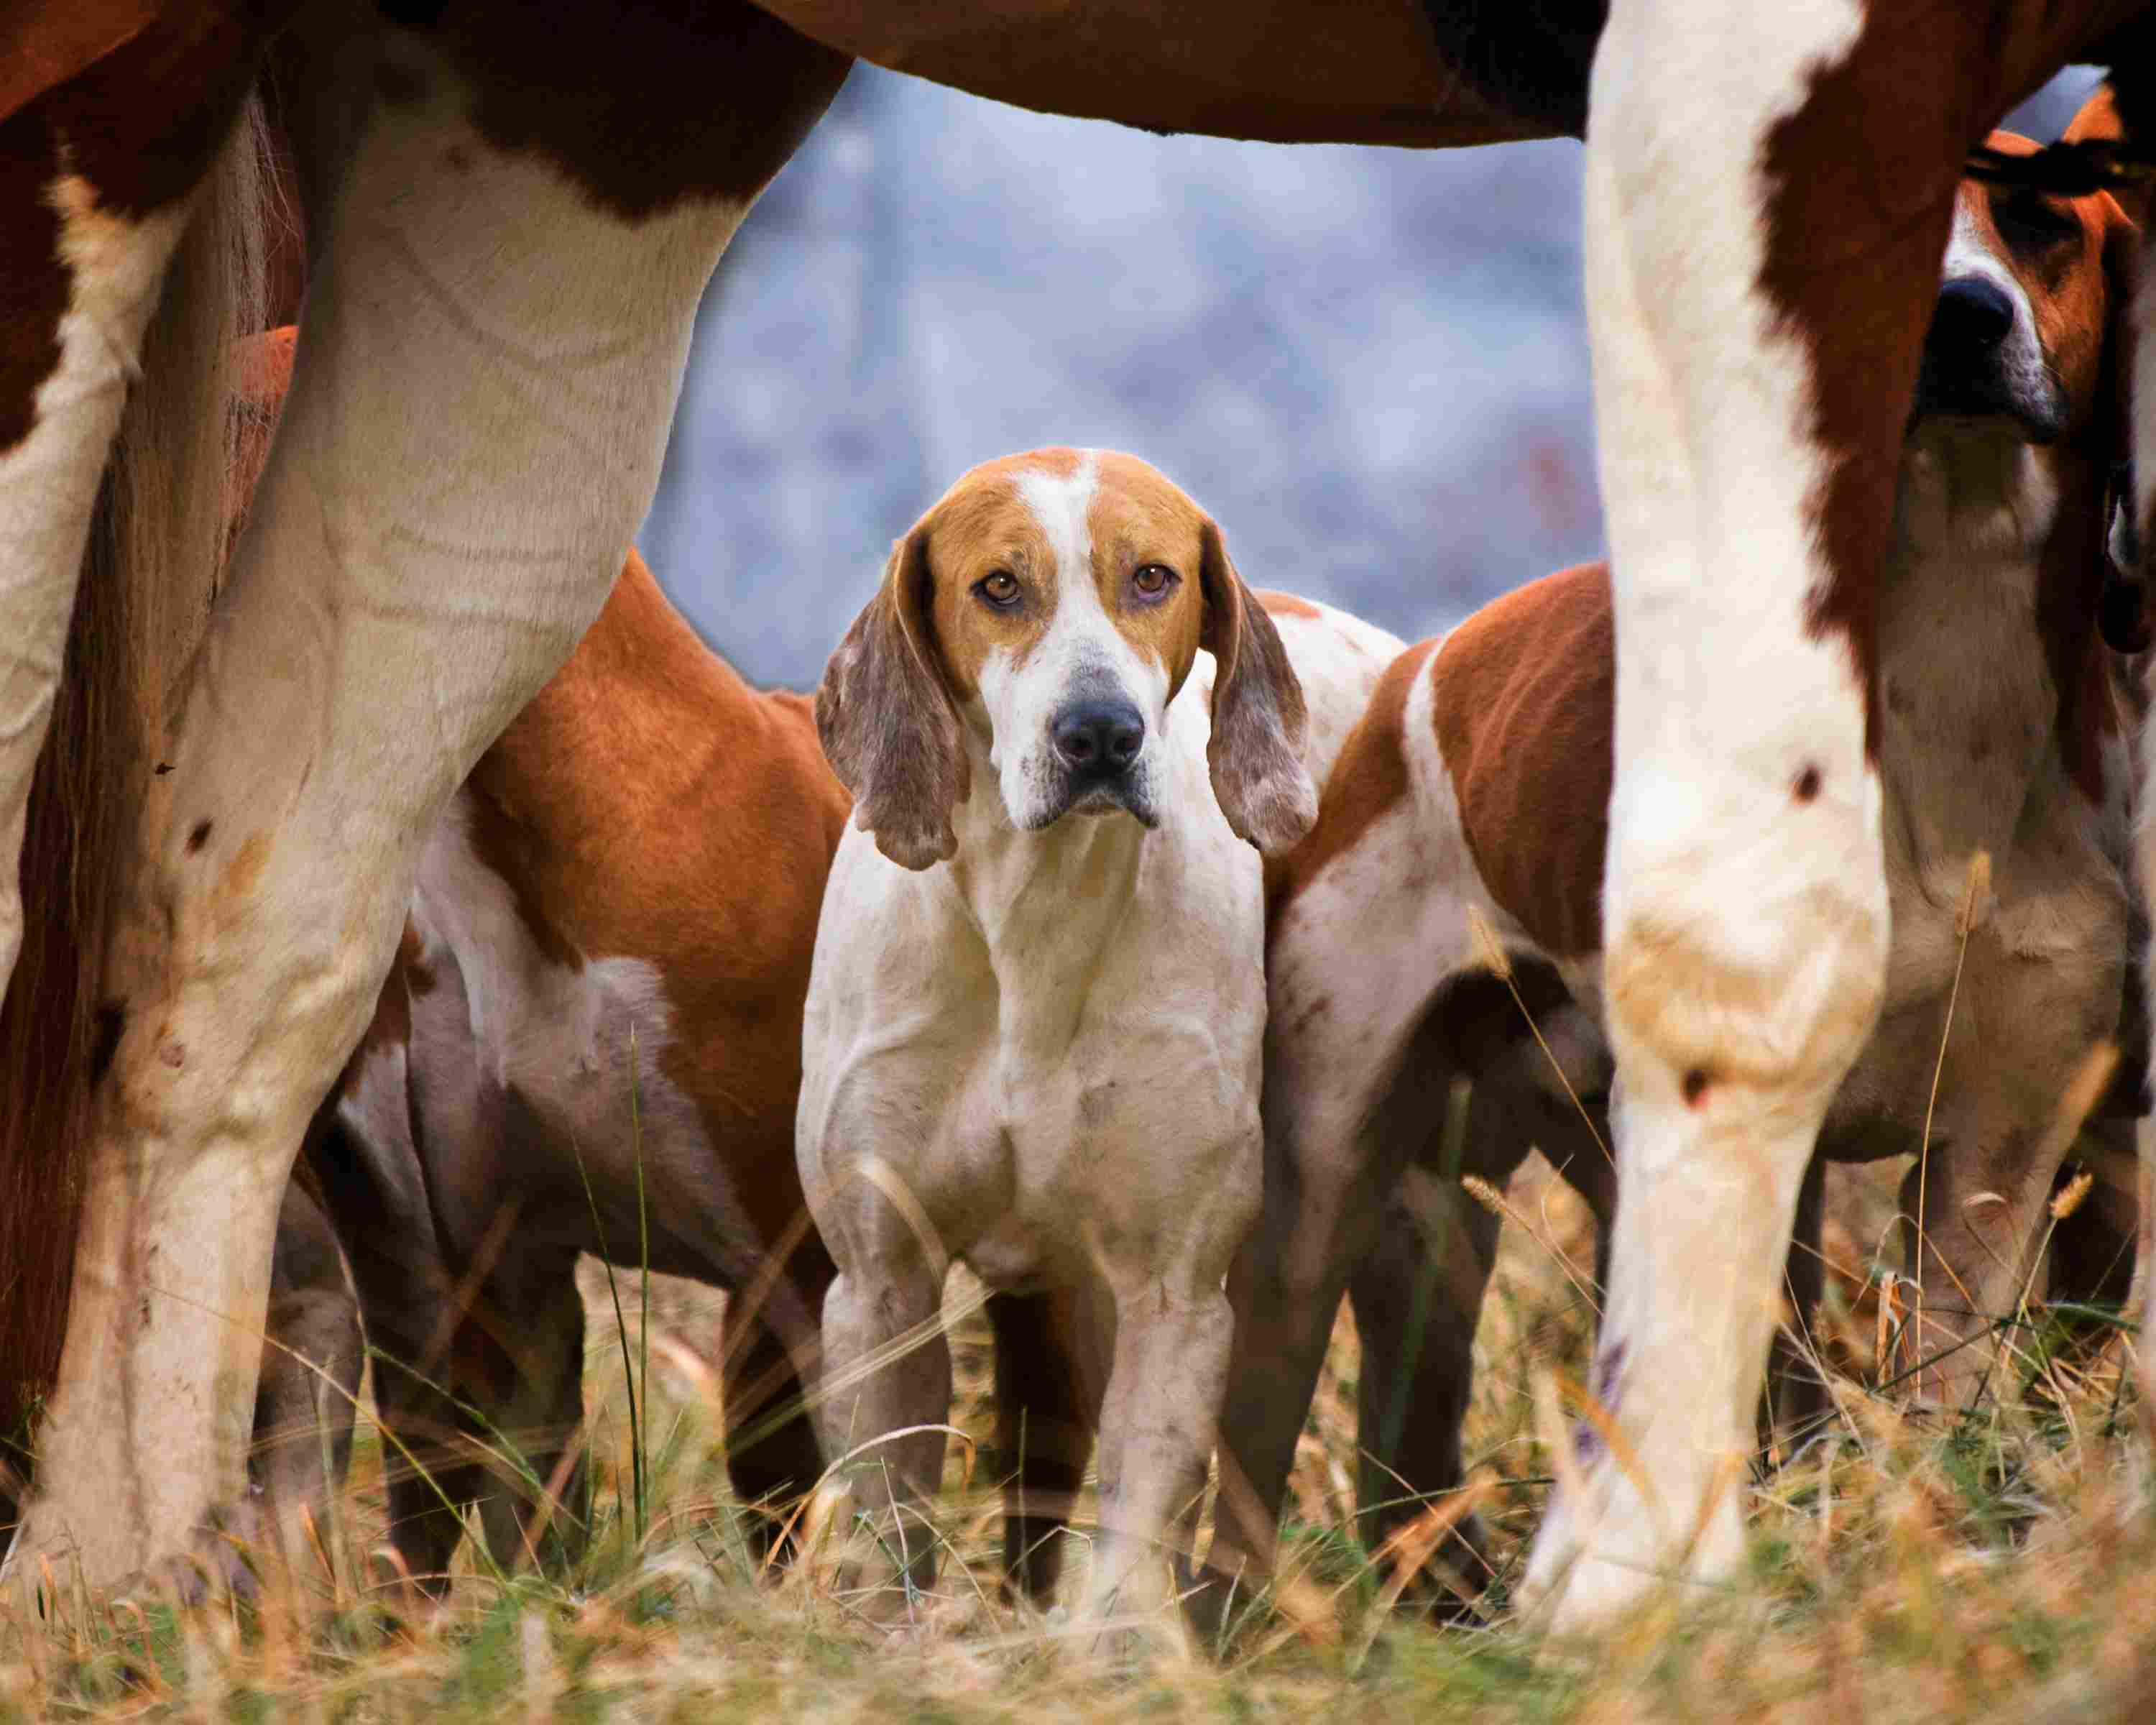 Foxhound framed by horse legs